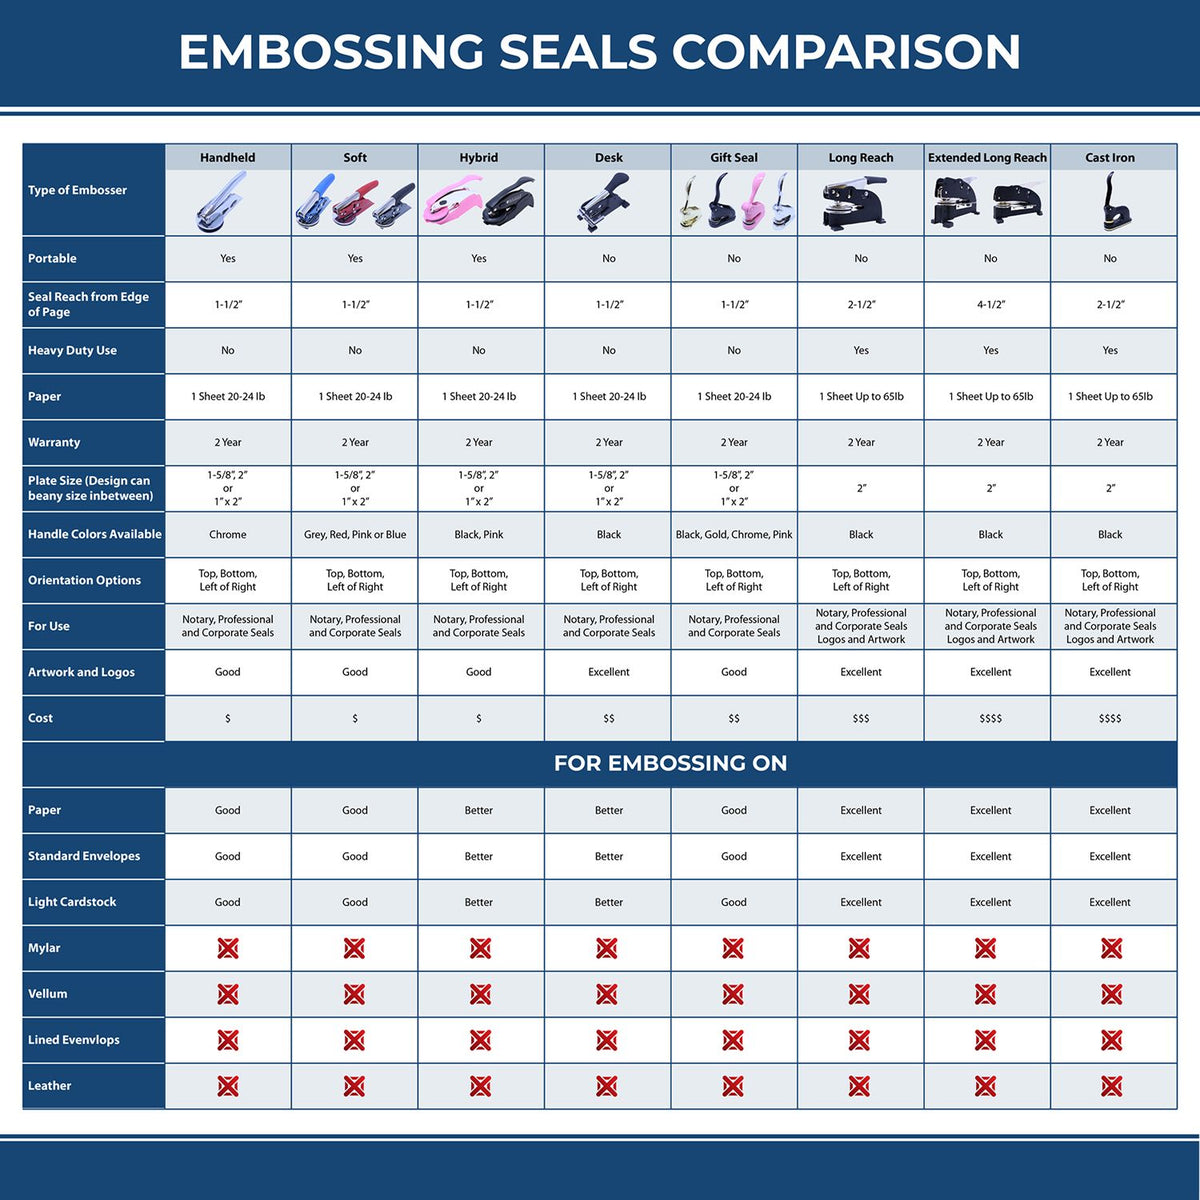 A comparison chart for the different types of mount models available for the Heavy Duty Cast Iron Louisiana Engineer Seal Embosser.